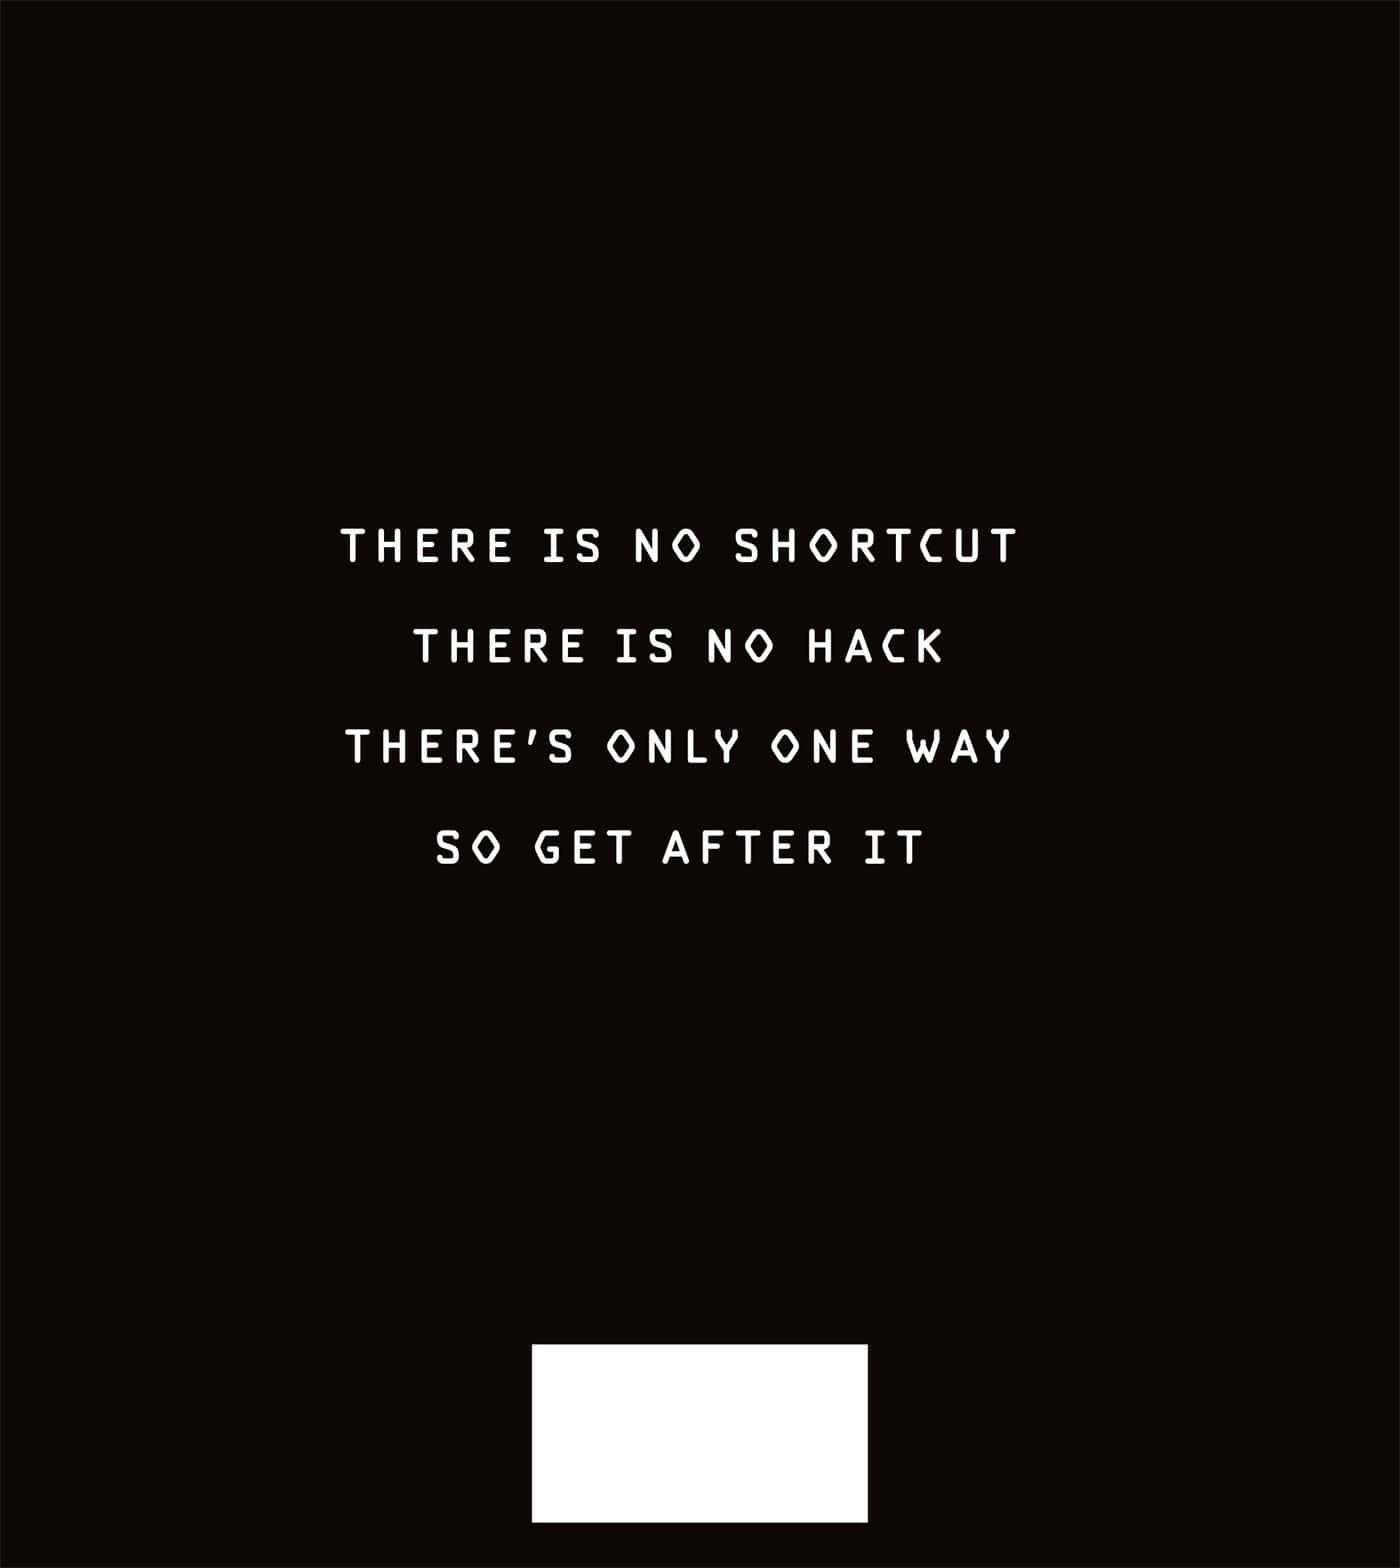 There Is No Shortcut There Is No Hack There Is Only One Way To Get After It Wallpaper